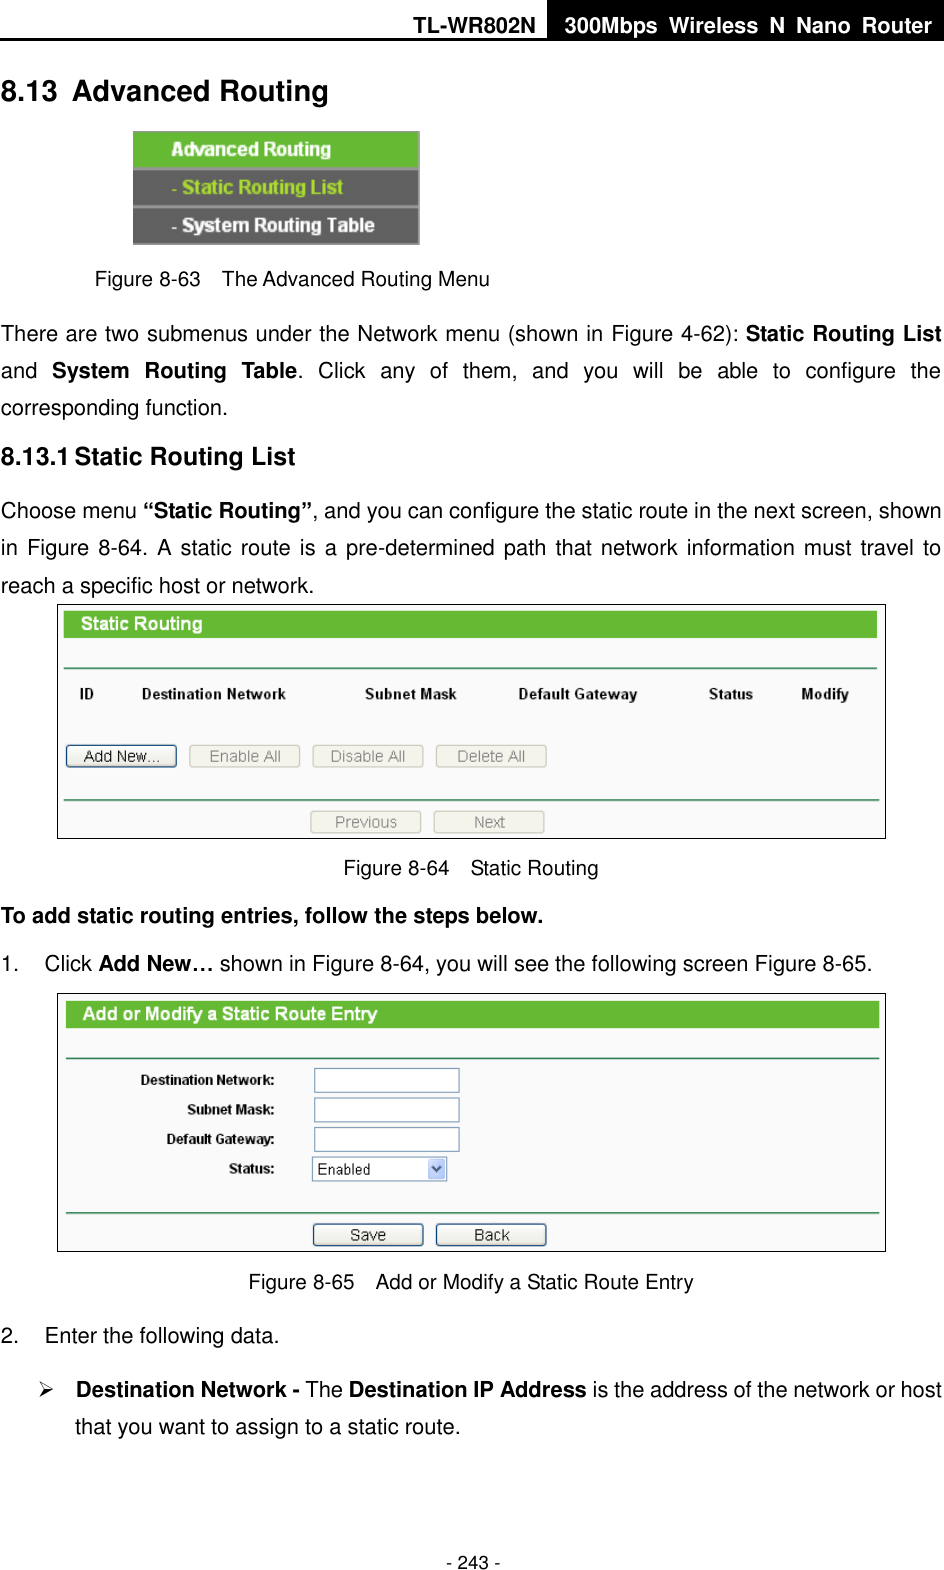 TL-WR802N 300Mbps  Wireless  N  Nano  Router  - 243 - 8.13  Advanced Routing  Figure 8-63  The Advanced Routing Menu There are two submenus under the Network menu (shown in Figure 4-62): Static Routing List and  System Routing  Table.  Click  any  of  them,  and  you  will  be  able  to  configure  the corresponding function. 8.13.1 Static Routing List Choose menu “Static Routing”, and you can configure the static route in the next screen, shown in Figure 8-64. A static route is a pre-determined path that network information must travel to reach a specific host or network.  Figure 8-64  Static Routing To add static routing entries, follow the steps below. 1.  Click Add New… shown in Figure 8-64, you will see the following screen Figure 8-65.    Figure 8-65  Add or Modify a Static Route Entry 2.  Enter the following data.  Destination Network - The Destination IP Address is the address of the network or host that you want to assign to a static route. 